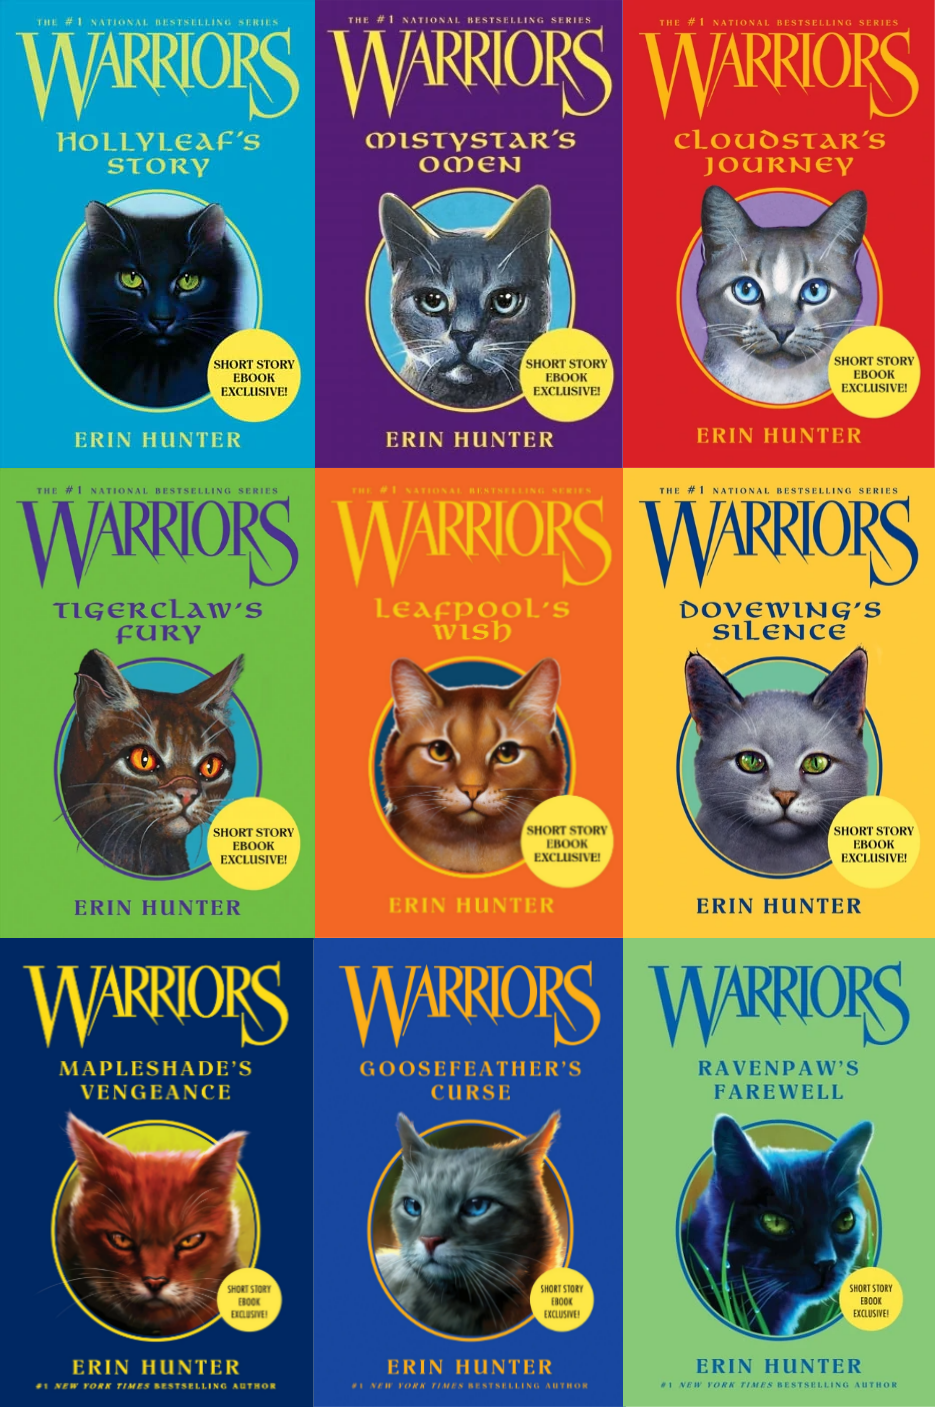 Lost Warrior, Blossomfall, rise Of Scourge, Thistleclaw, warriors The  Prophecies Begin, Into The Wild, Spottedleaf, scourge, erin Hunter,  firestar